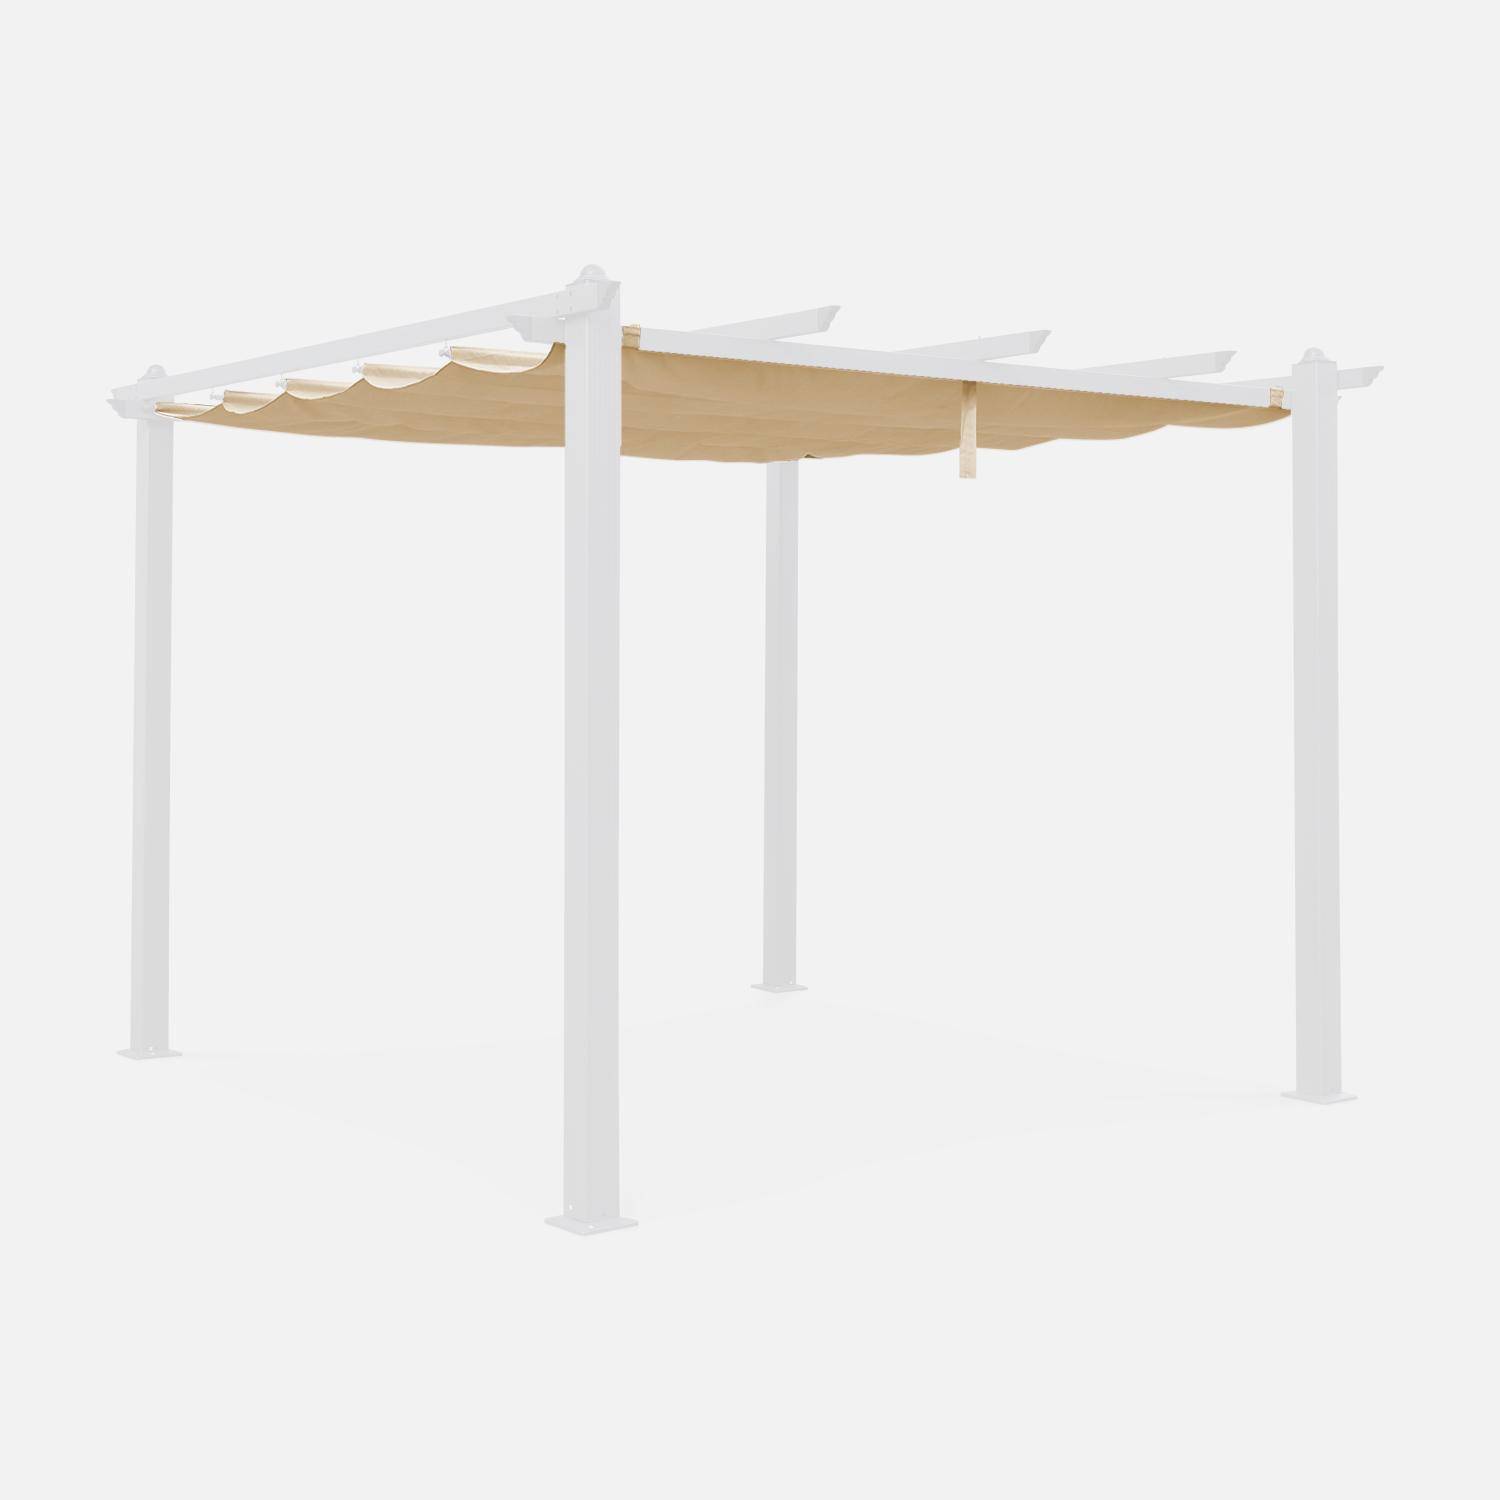 Canopy roof for 3x3m Condate gazebo - pergola replacement canopy - Beige,sweeek,Photo1